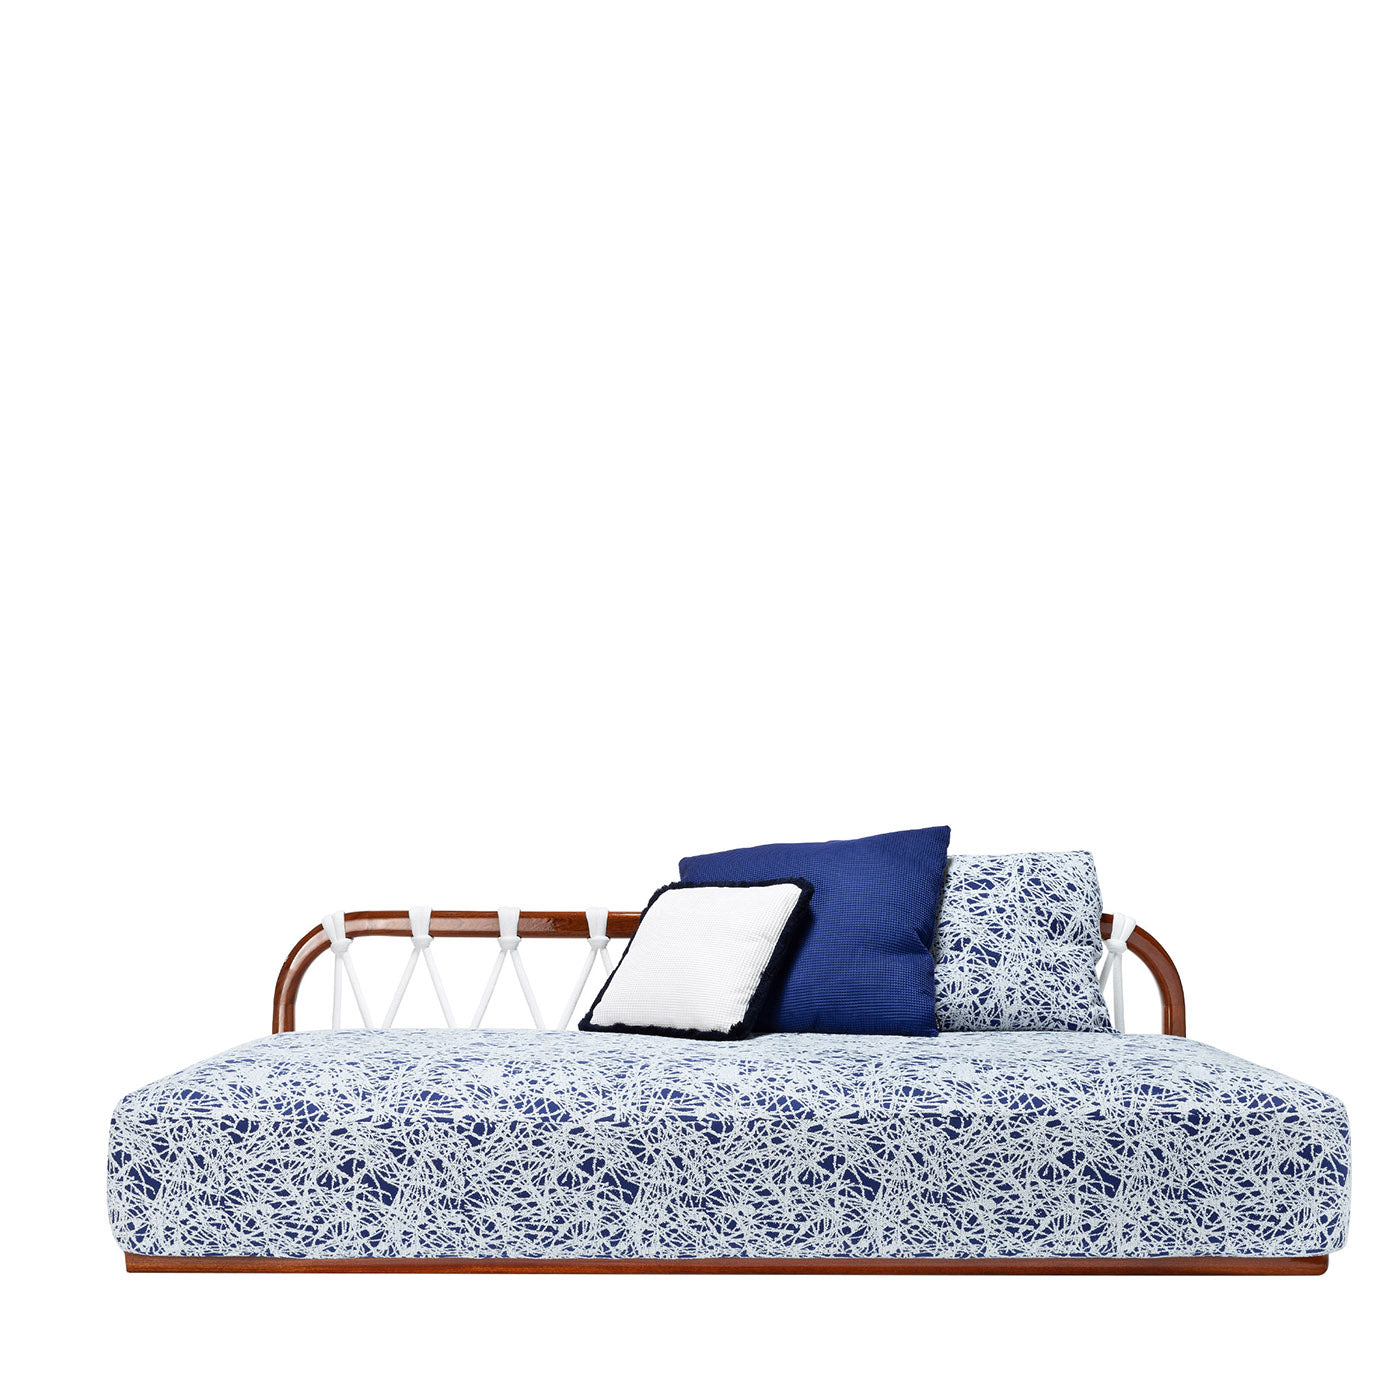 Sunset Basket Blue & White Central Element by Paola Navone & AMP - Main view